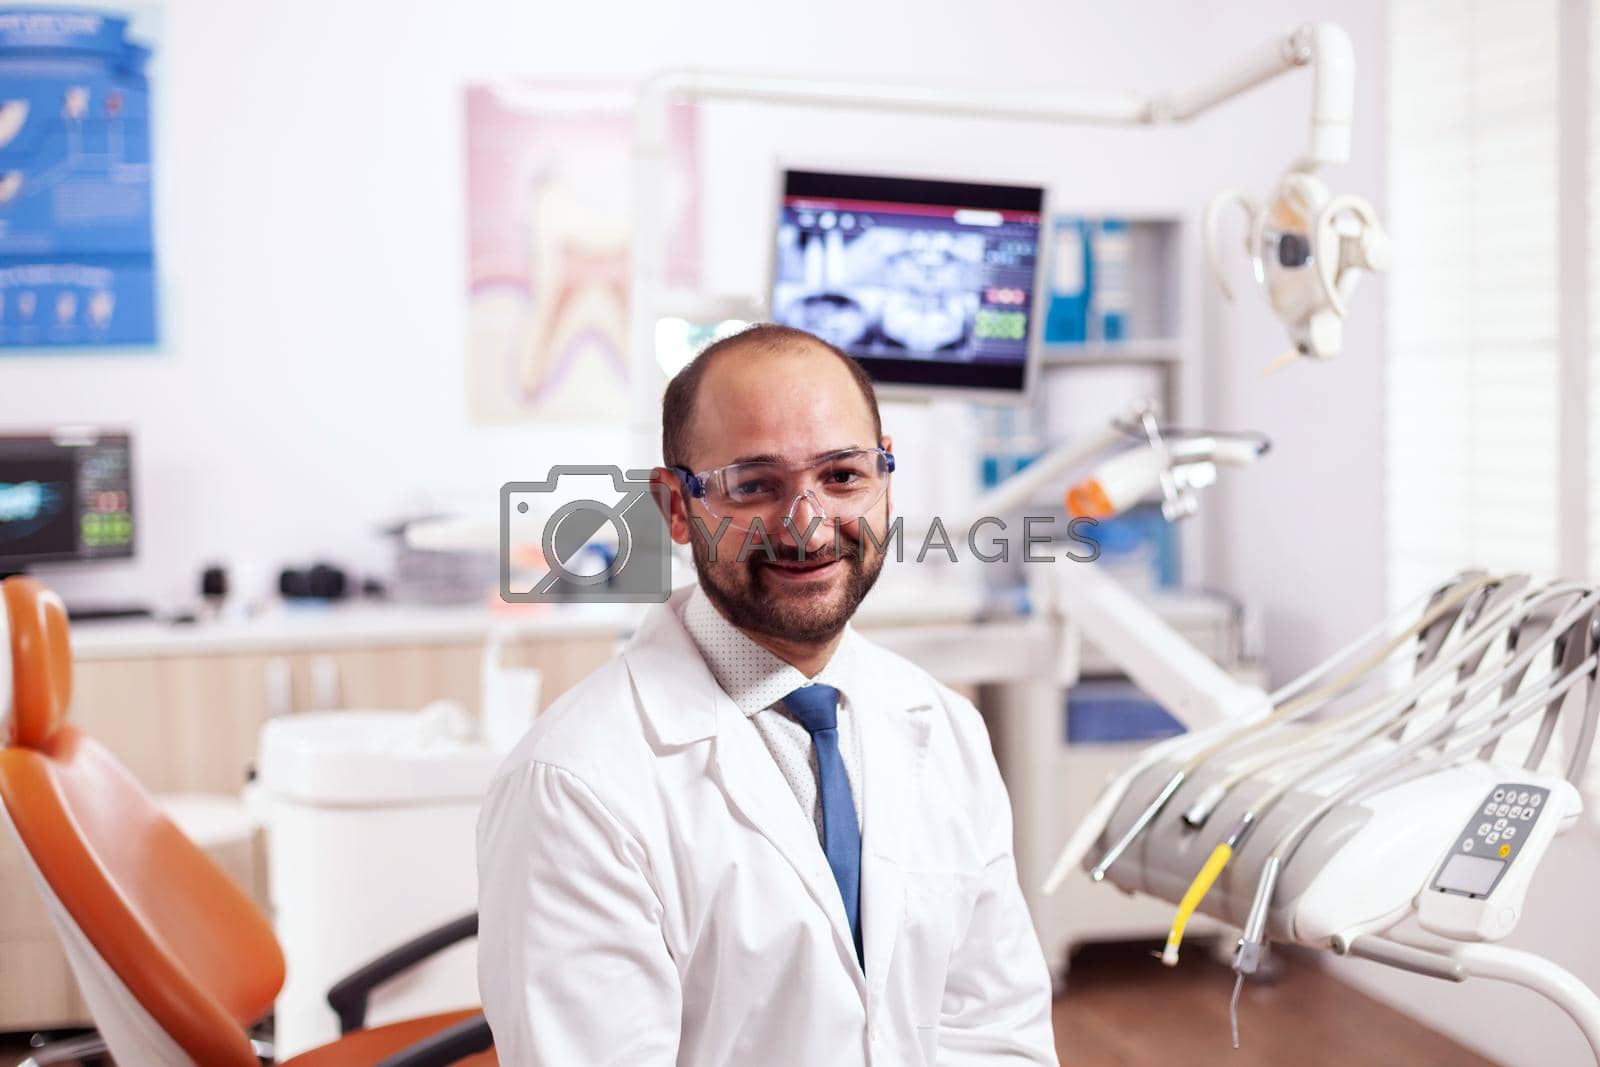 Confident dentist in stomatology cabinet with orange equiptment wearing dental uniform. Medical specialist in oral hygiene wearing lab coat looking at camera in dentistry office.